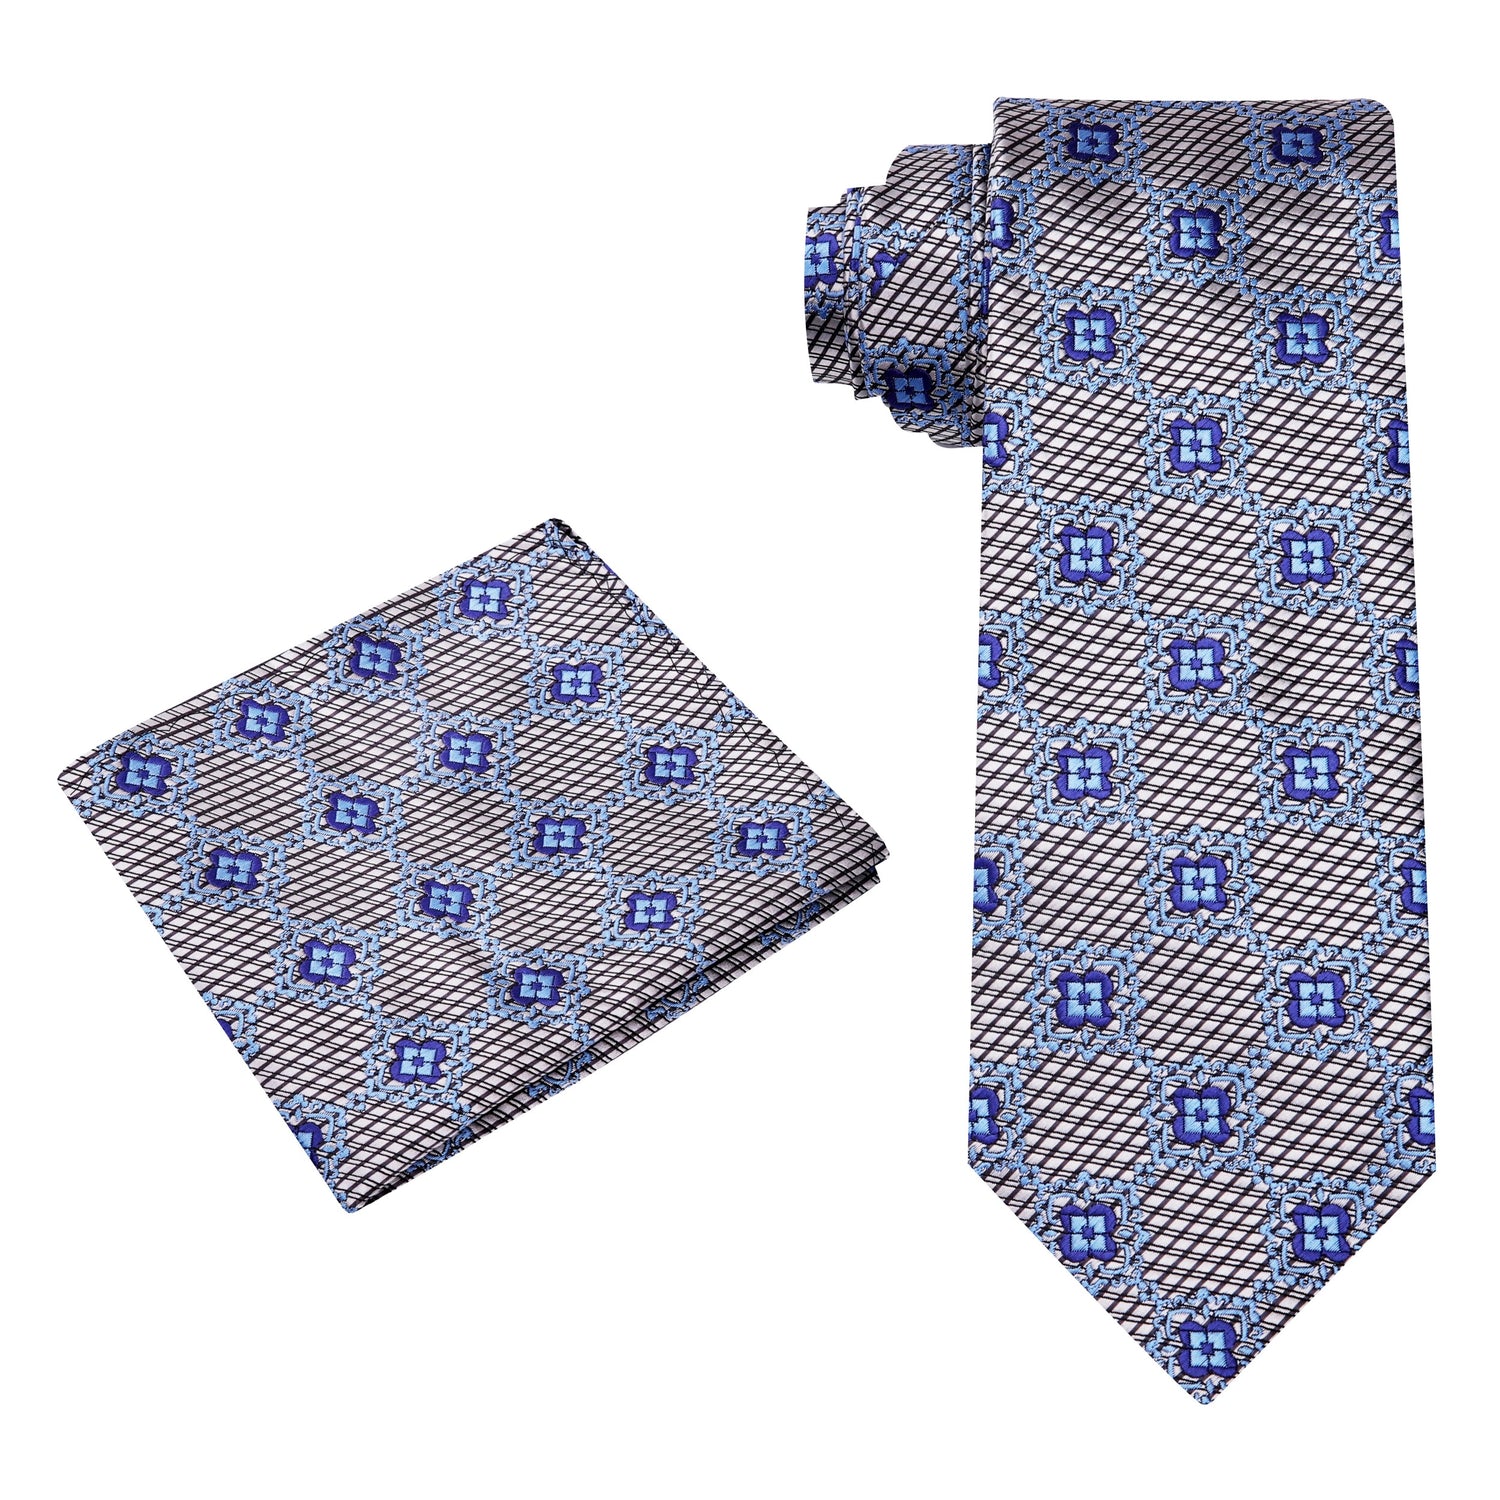 Alt View: A Silver, Blue Geometric Background With Small Flowers Pattern Silk Necktie, Matching Pocket Square